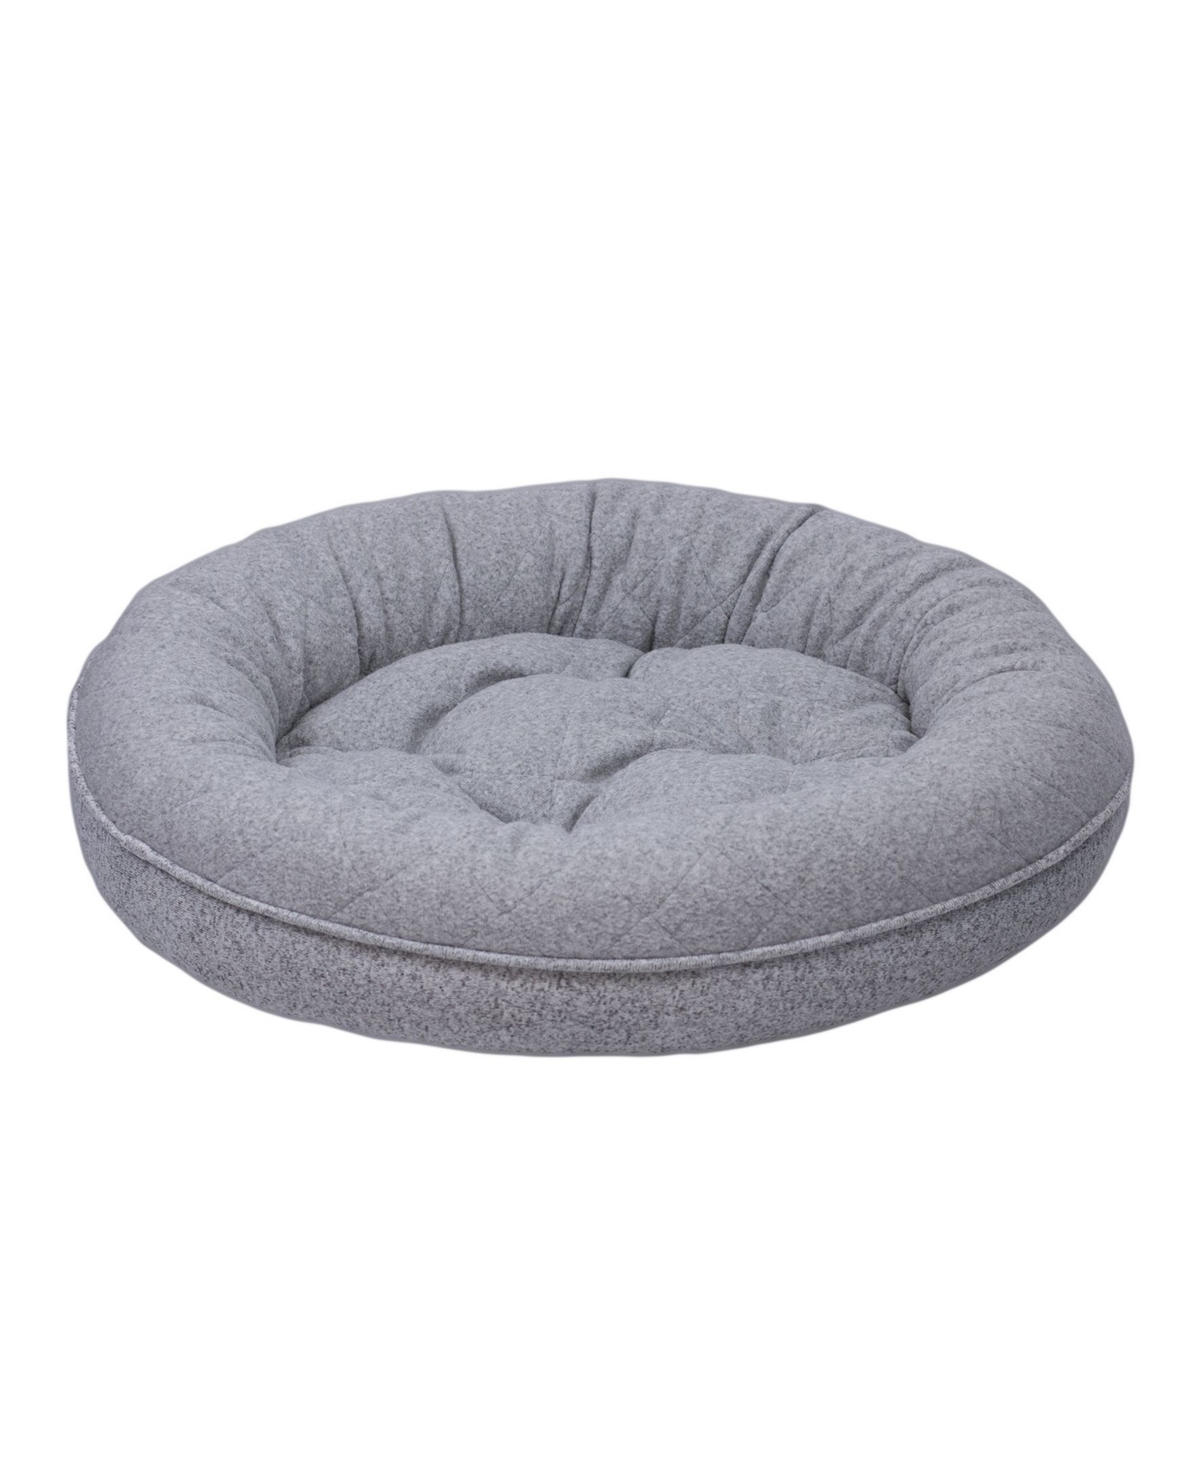 Closeout! Arlee Donut Lounger and Cuddler Style Pet Bed, Small - Gray